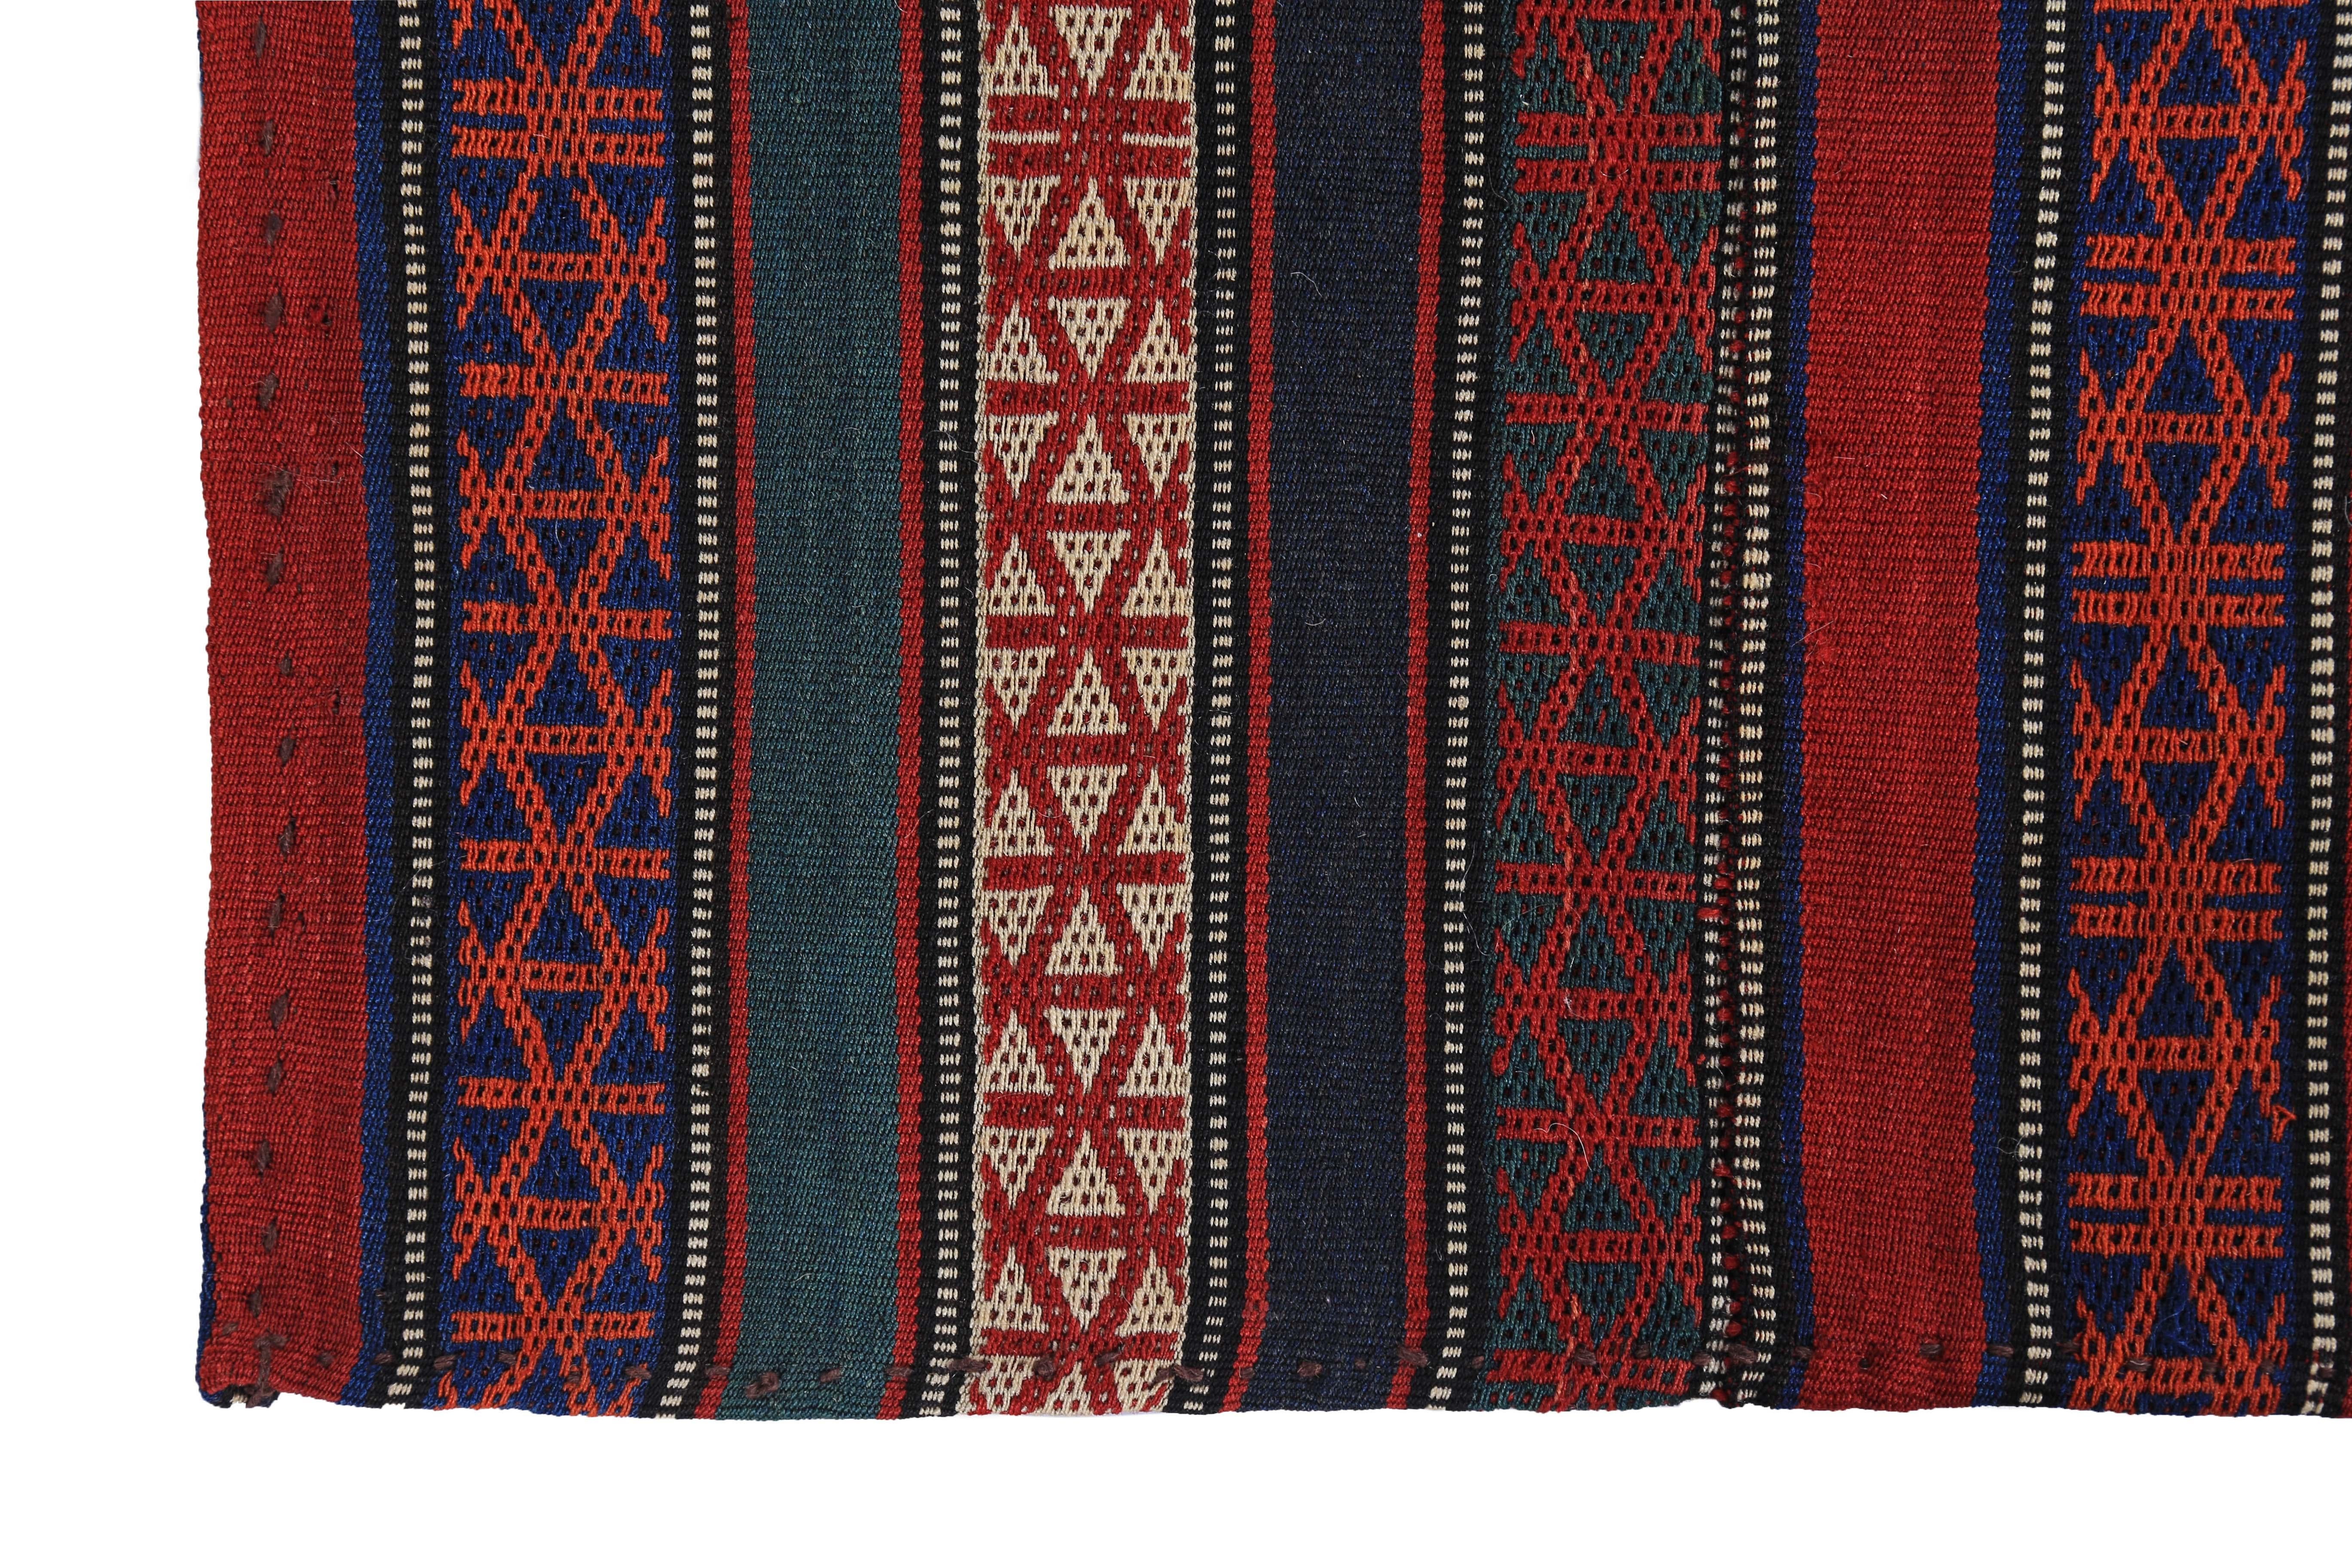 Hand-Woven Modern Turkish Kilim Rug with Red and Blue Stripes with Tribal Design For Sale